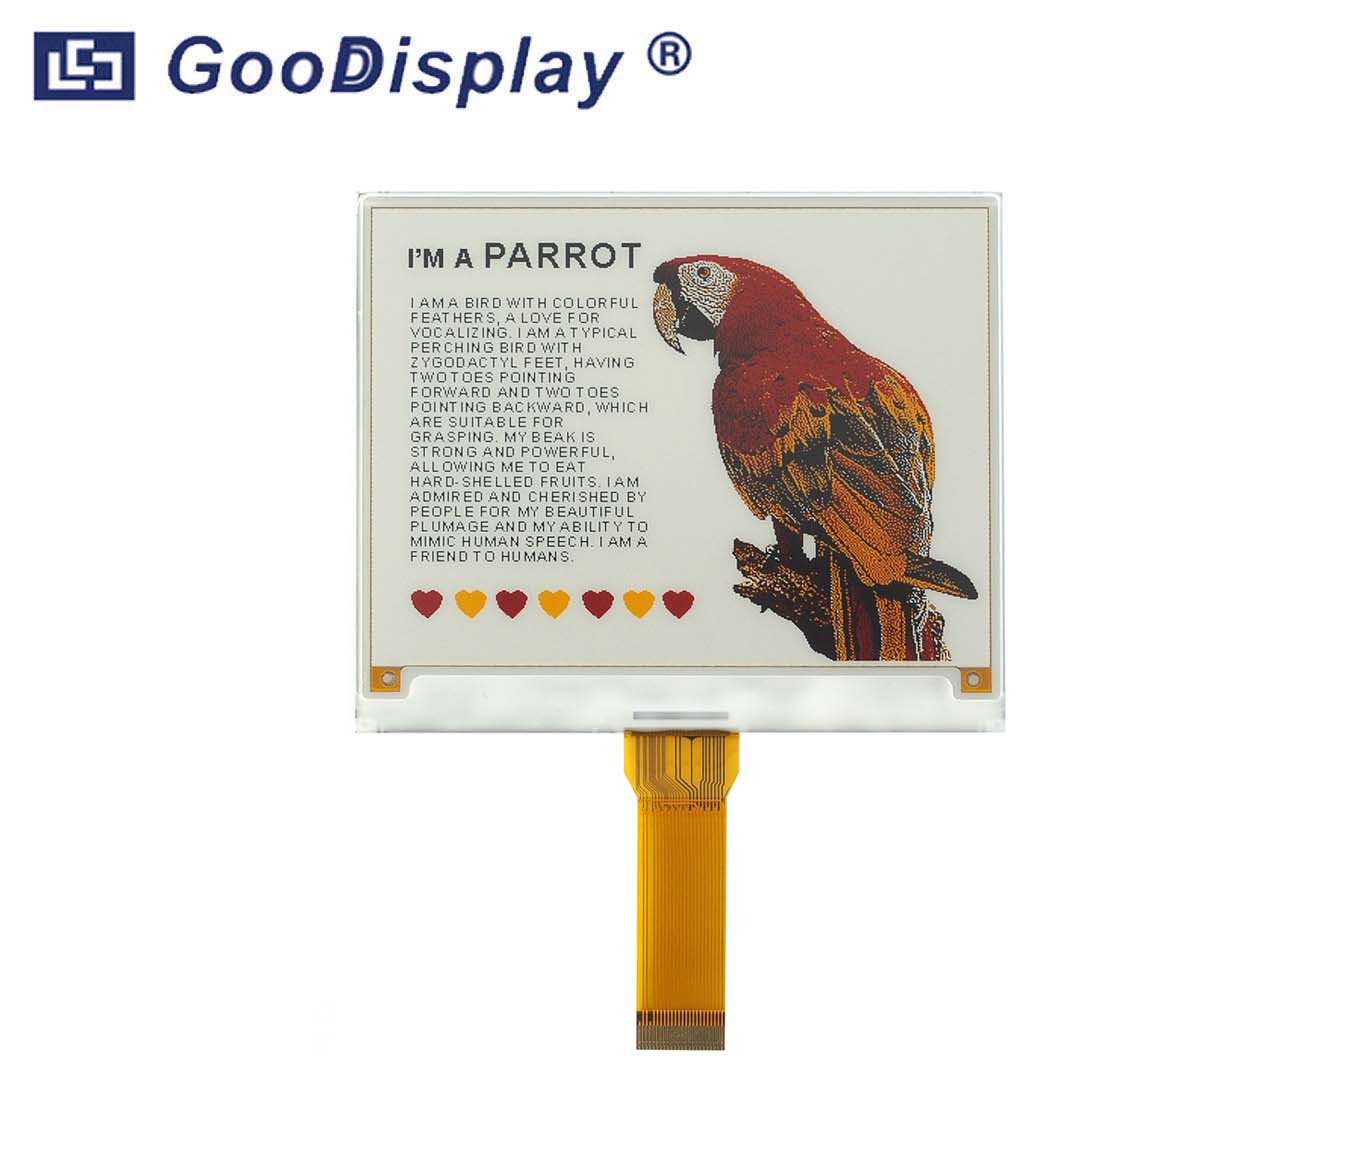 4.2-inch Black, White, Yellow, and Red E Ink Display 400x300, GDEY042F51